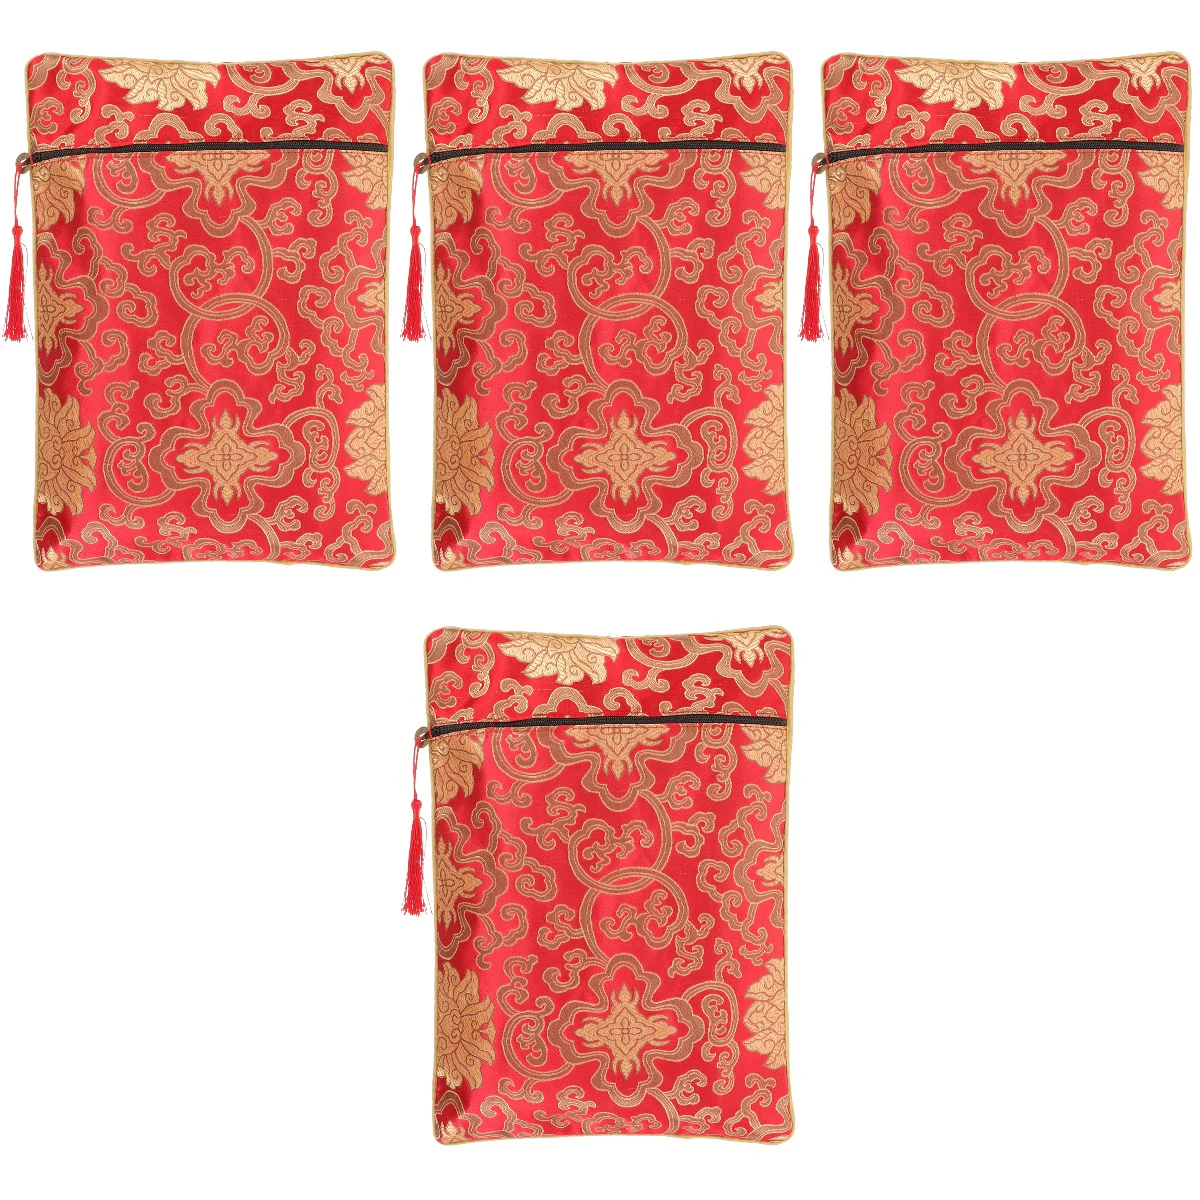 

4pcs Brocade Embroidery Bag Scripture Wrapping Pouch Chinese Style Bag for Temple